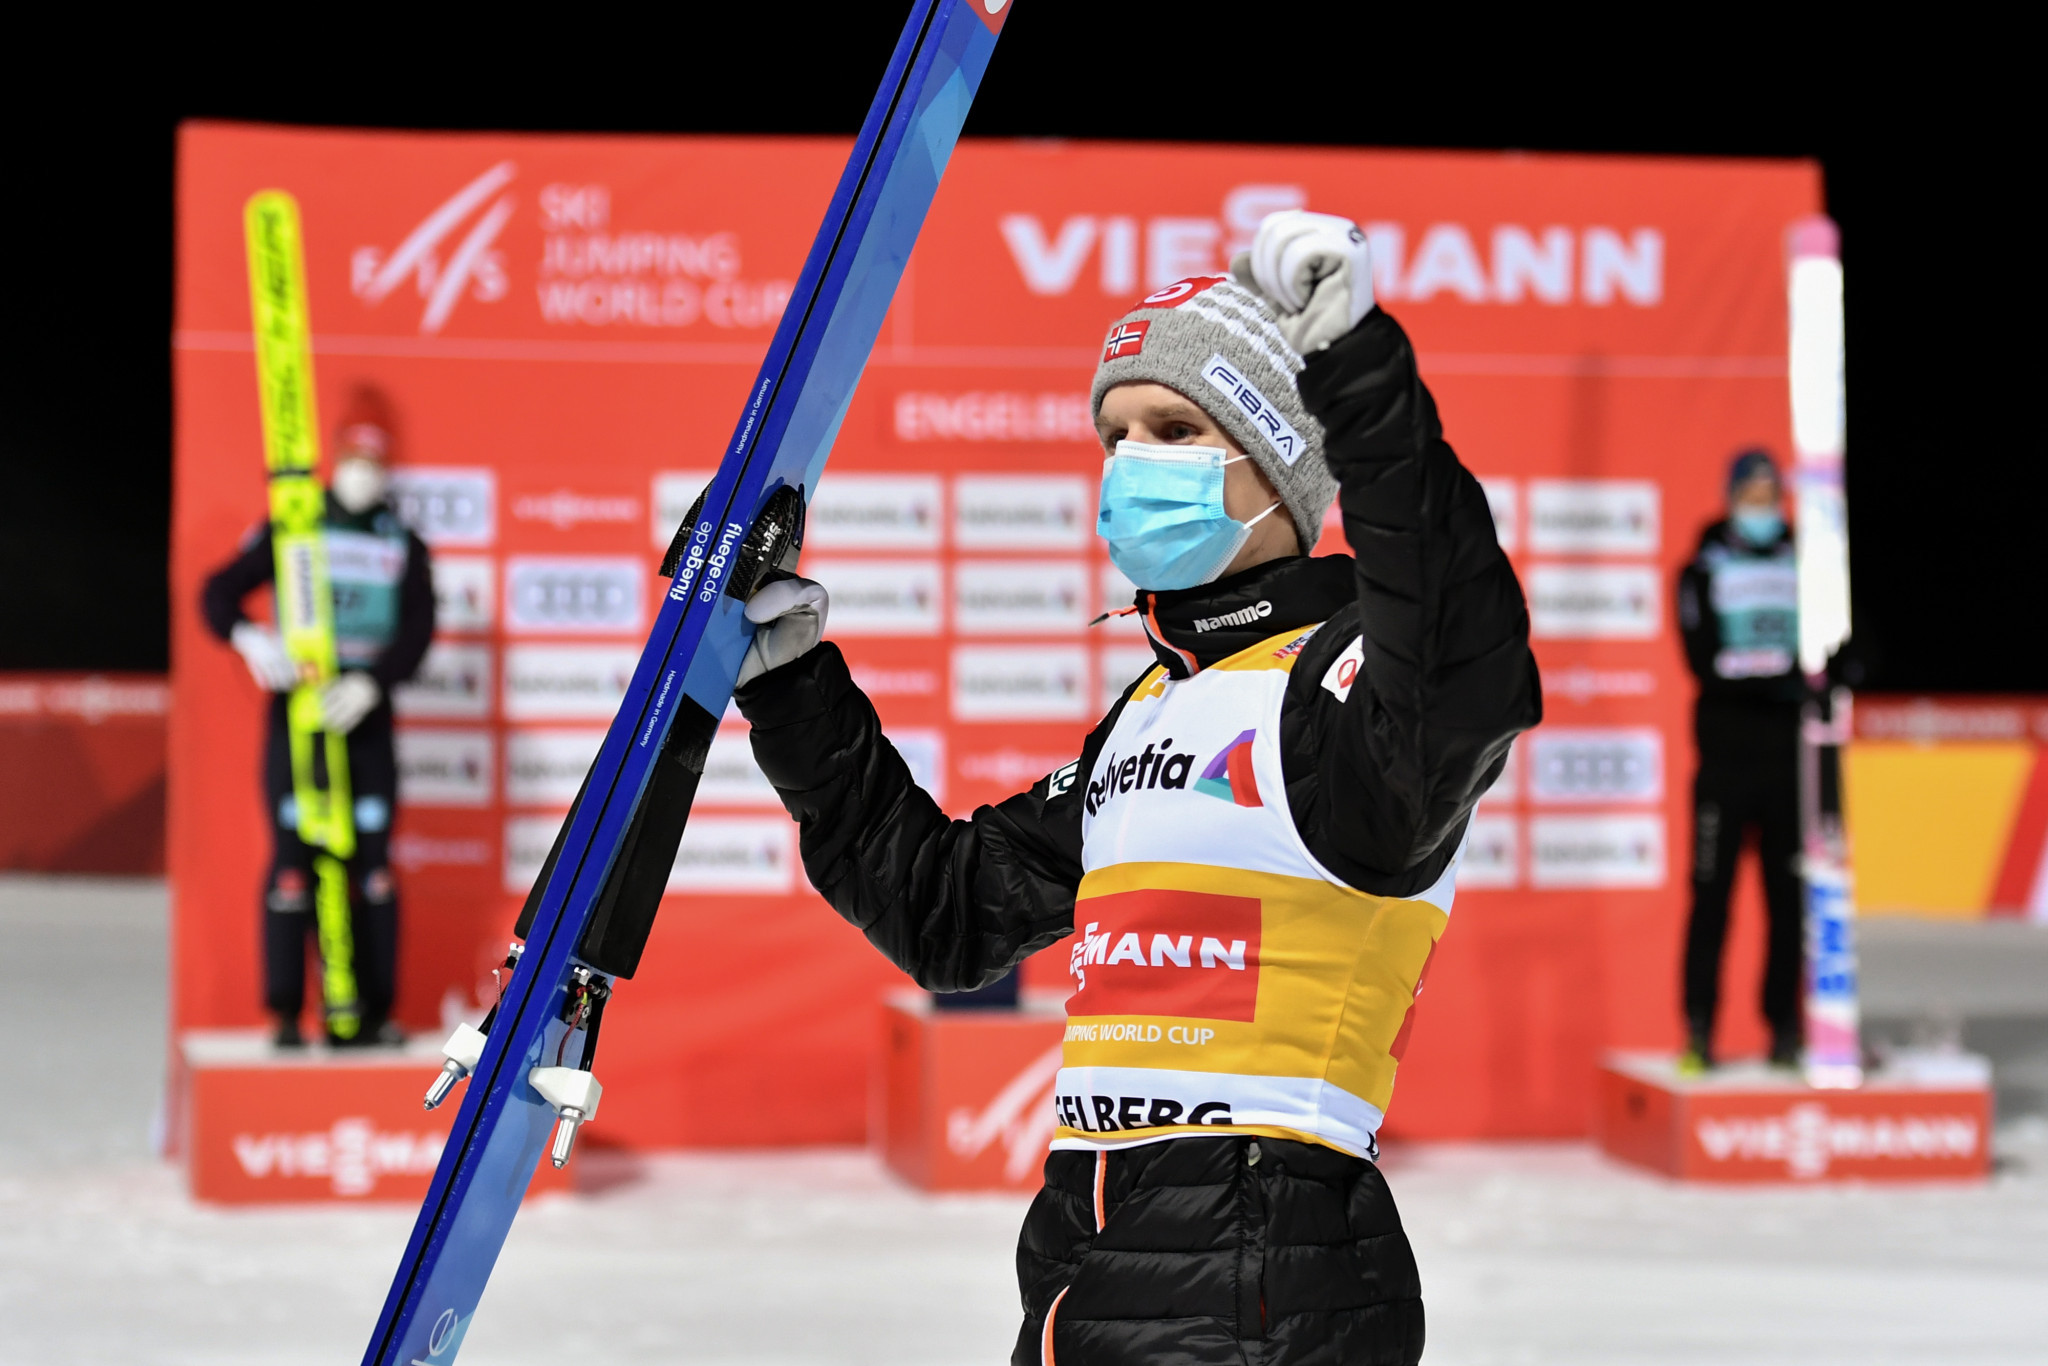 Granerud wins fifth men's FIS Ski Jumping World Cup leg in a row